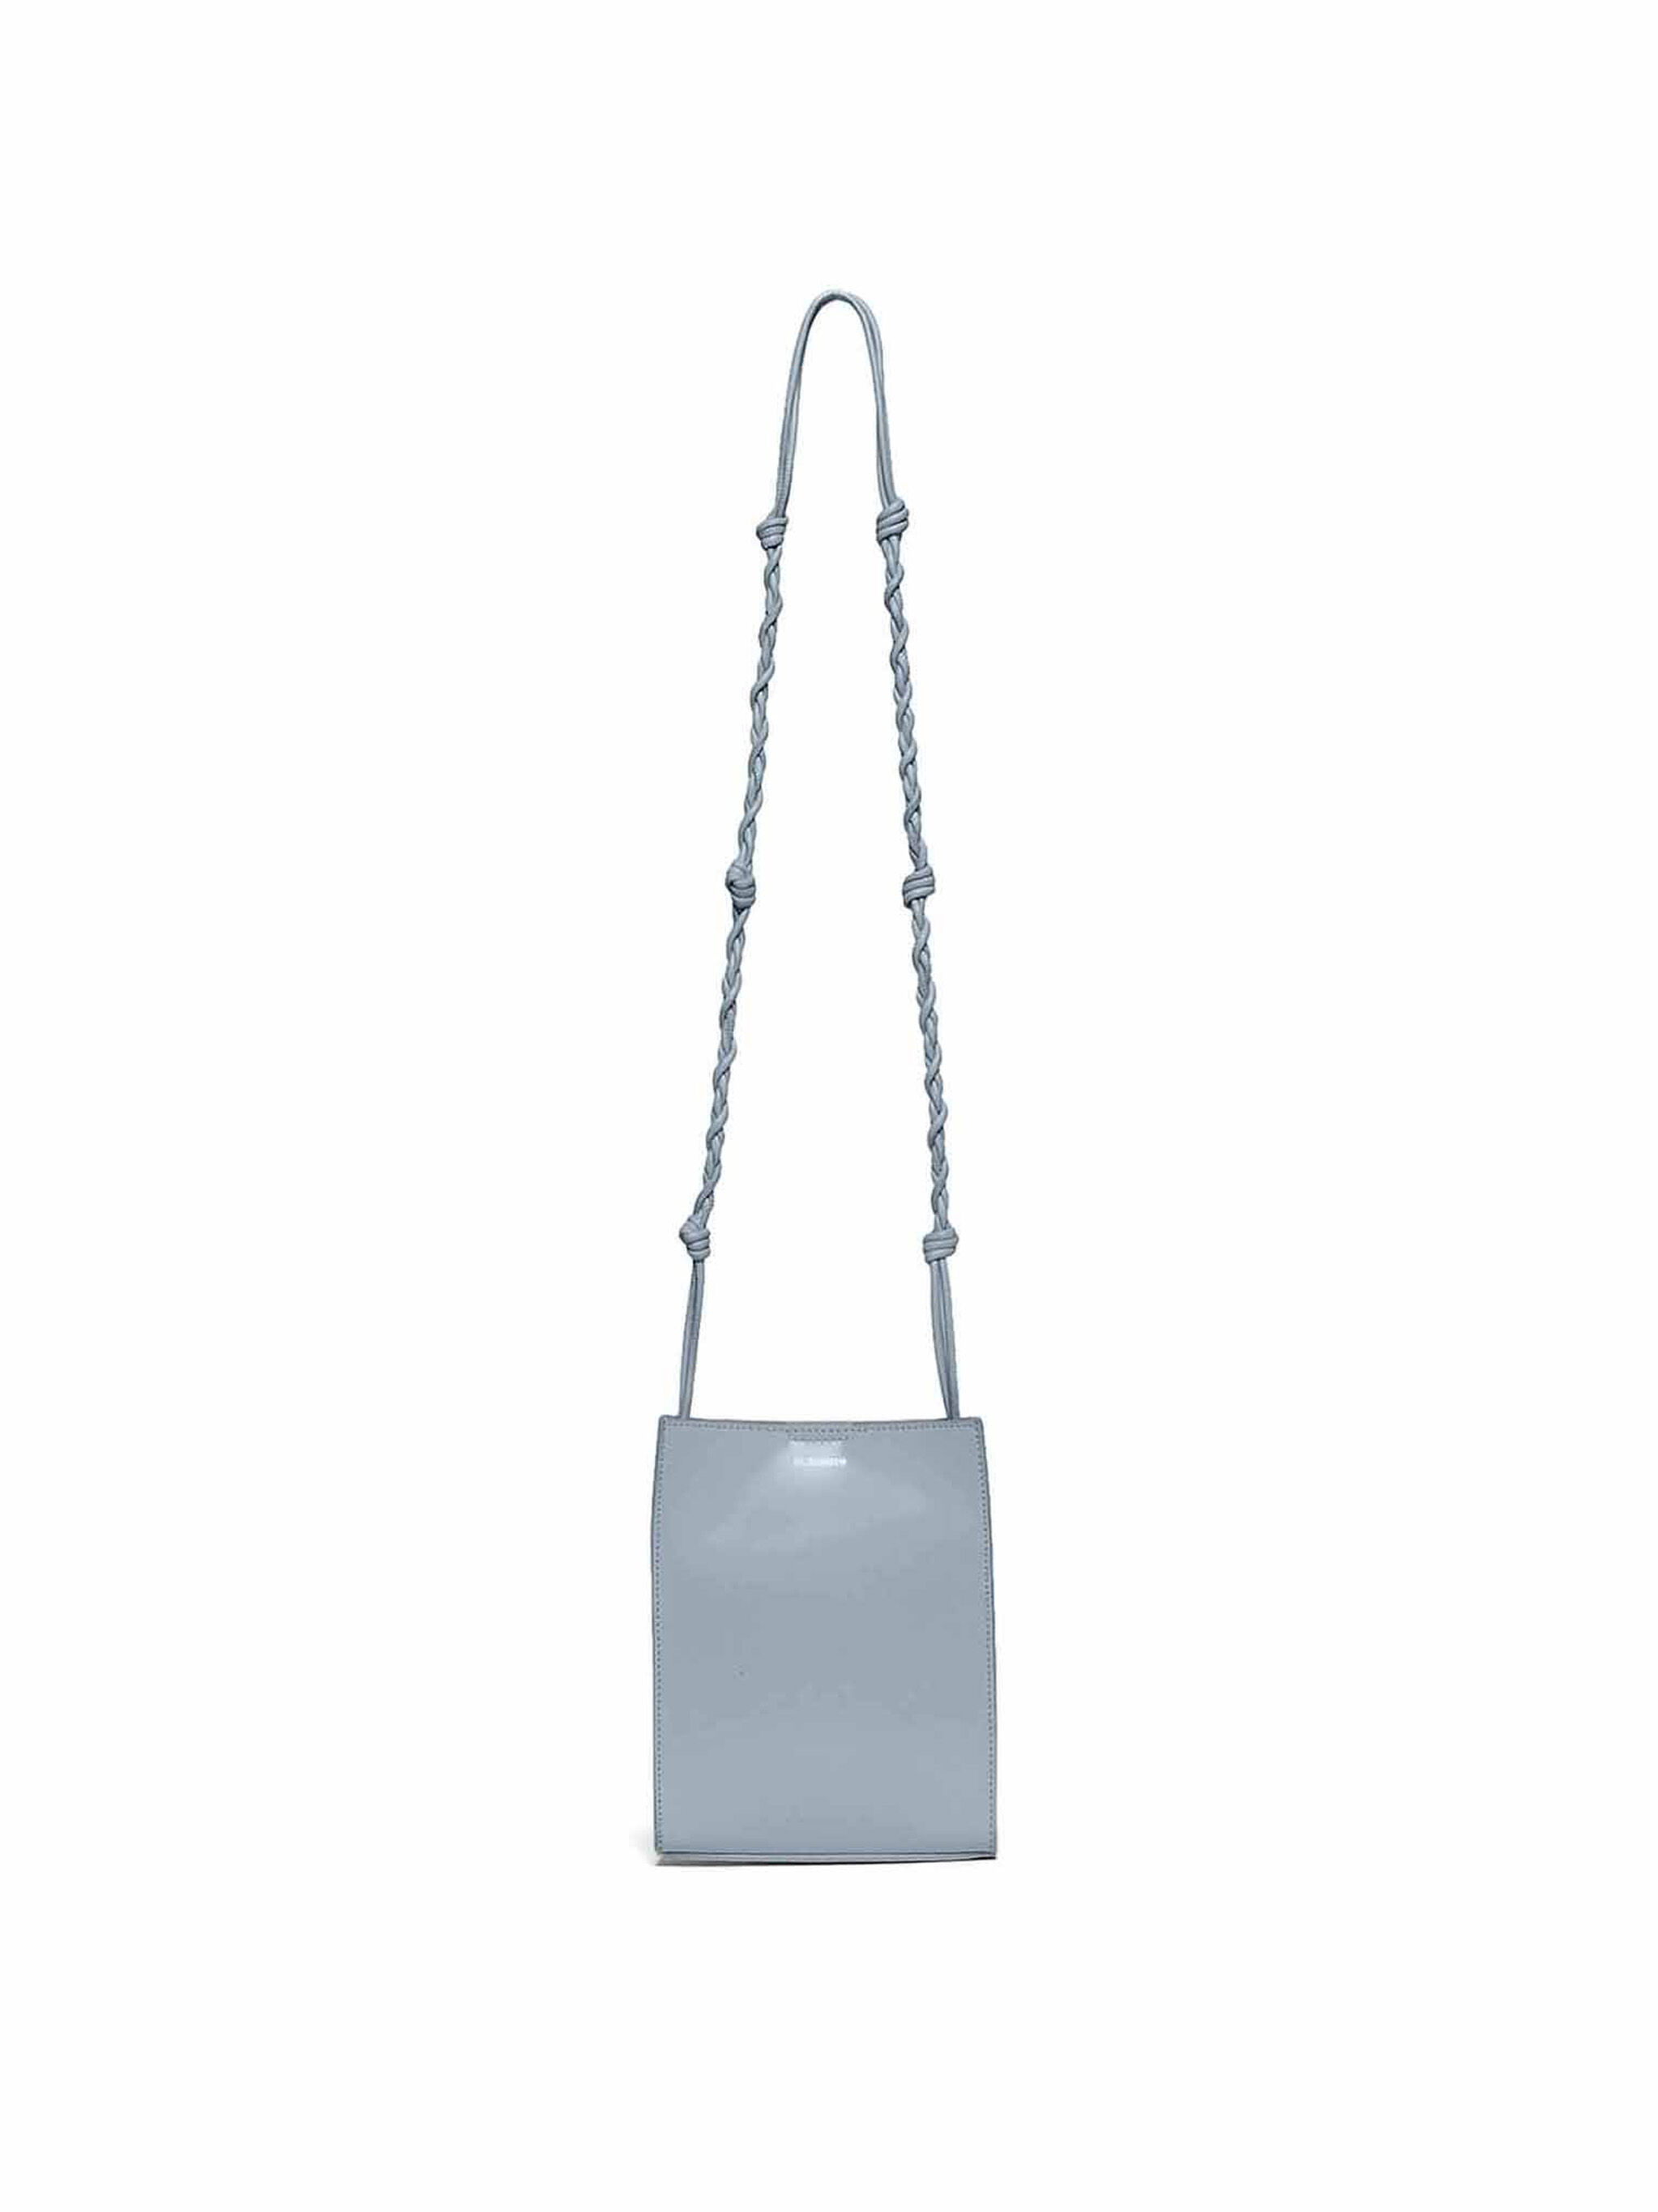 Jil Sander Small Tangle Bag in Blue Leather | THE FLAMEL®